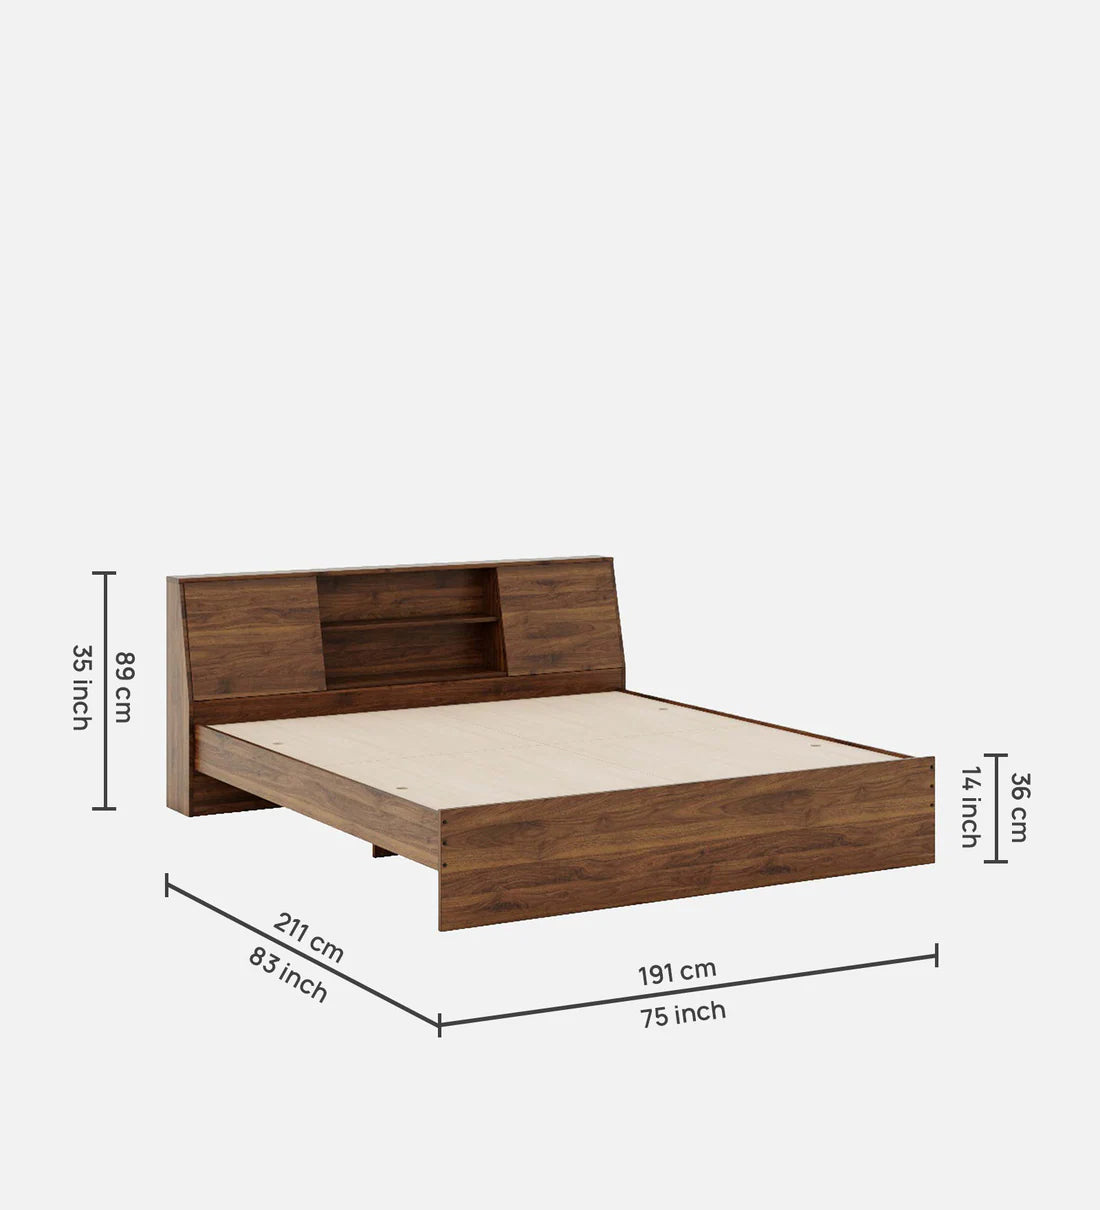 Denz King Size Bed In Columbian Walnut Colour